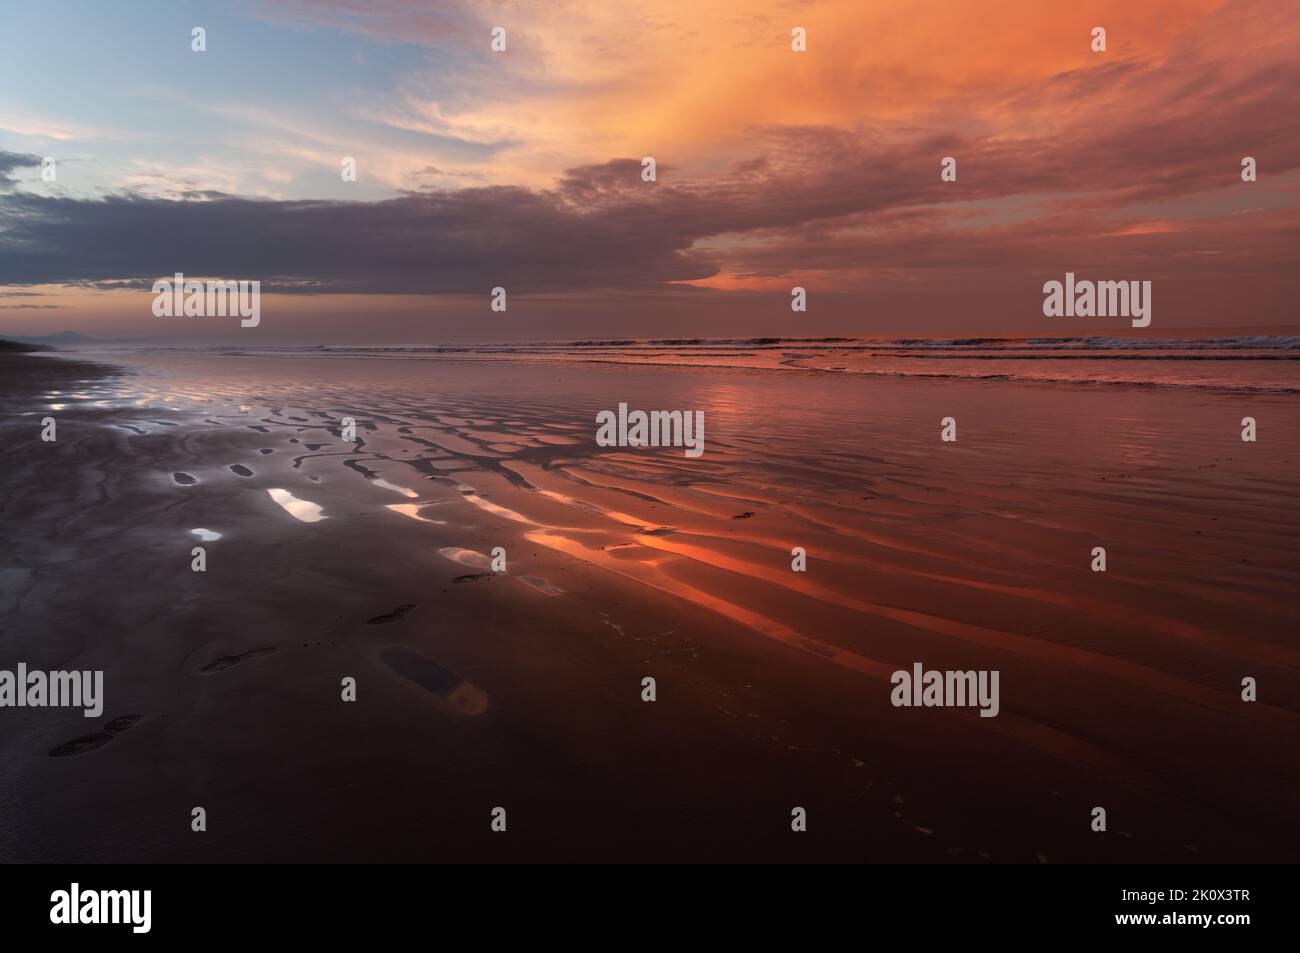 Vivid dawn colors at a tropical beach and sky clouds reflection on wet sand, shown in Chiriqui, Panama. Stock Photo